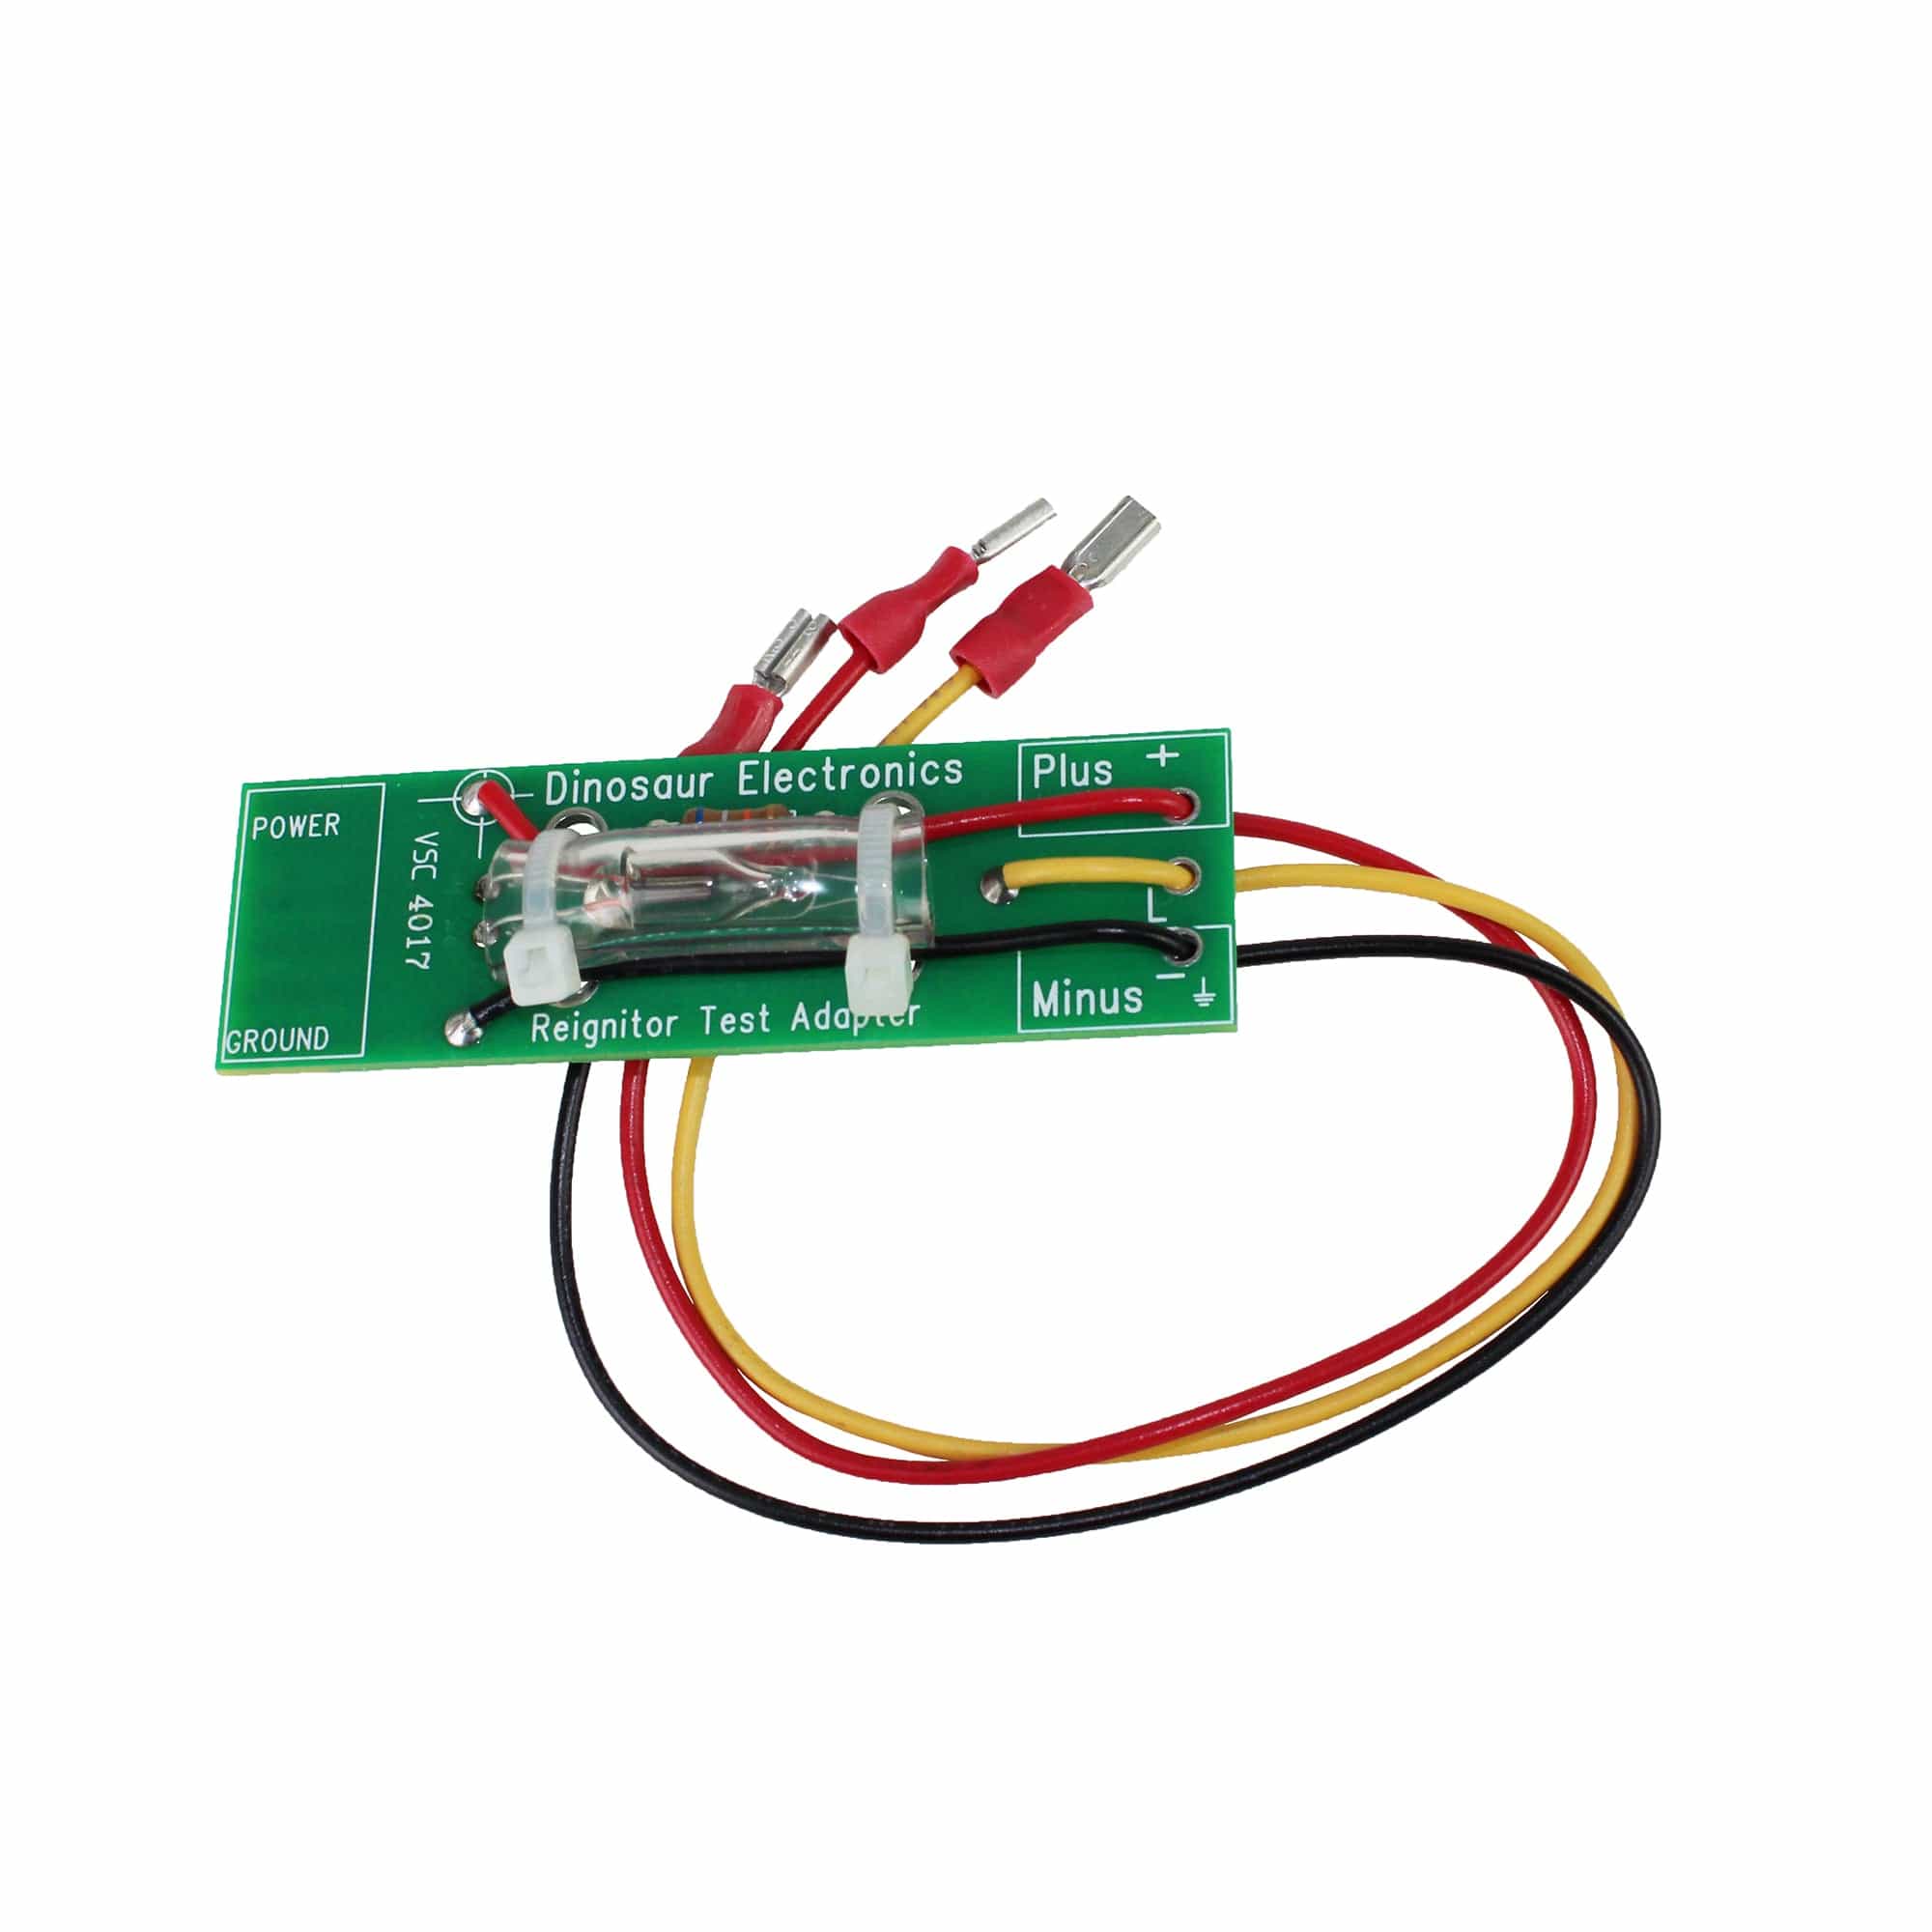 Dinosaur Electronics RE-IGNITOR TEST ADAPTER